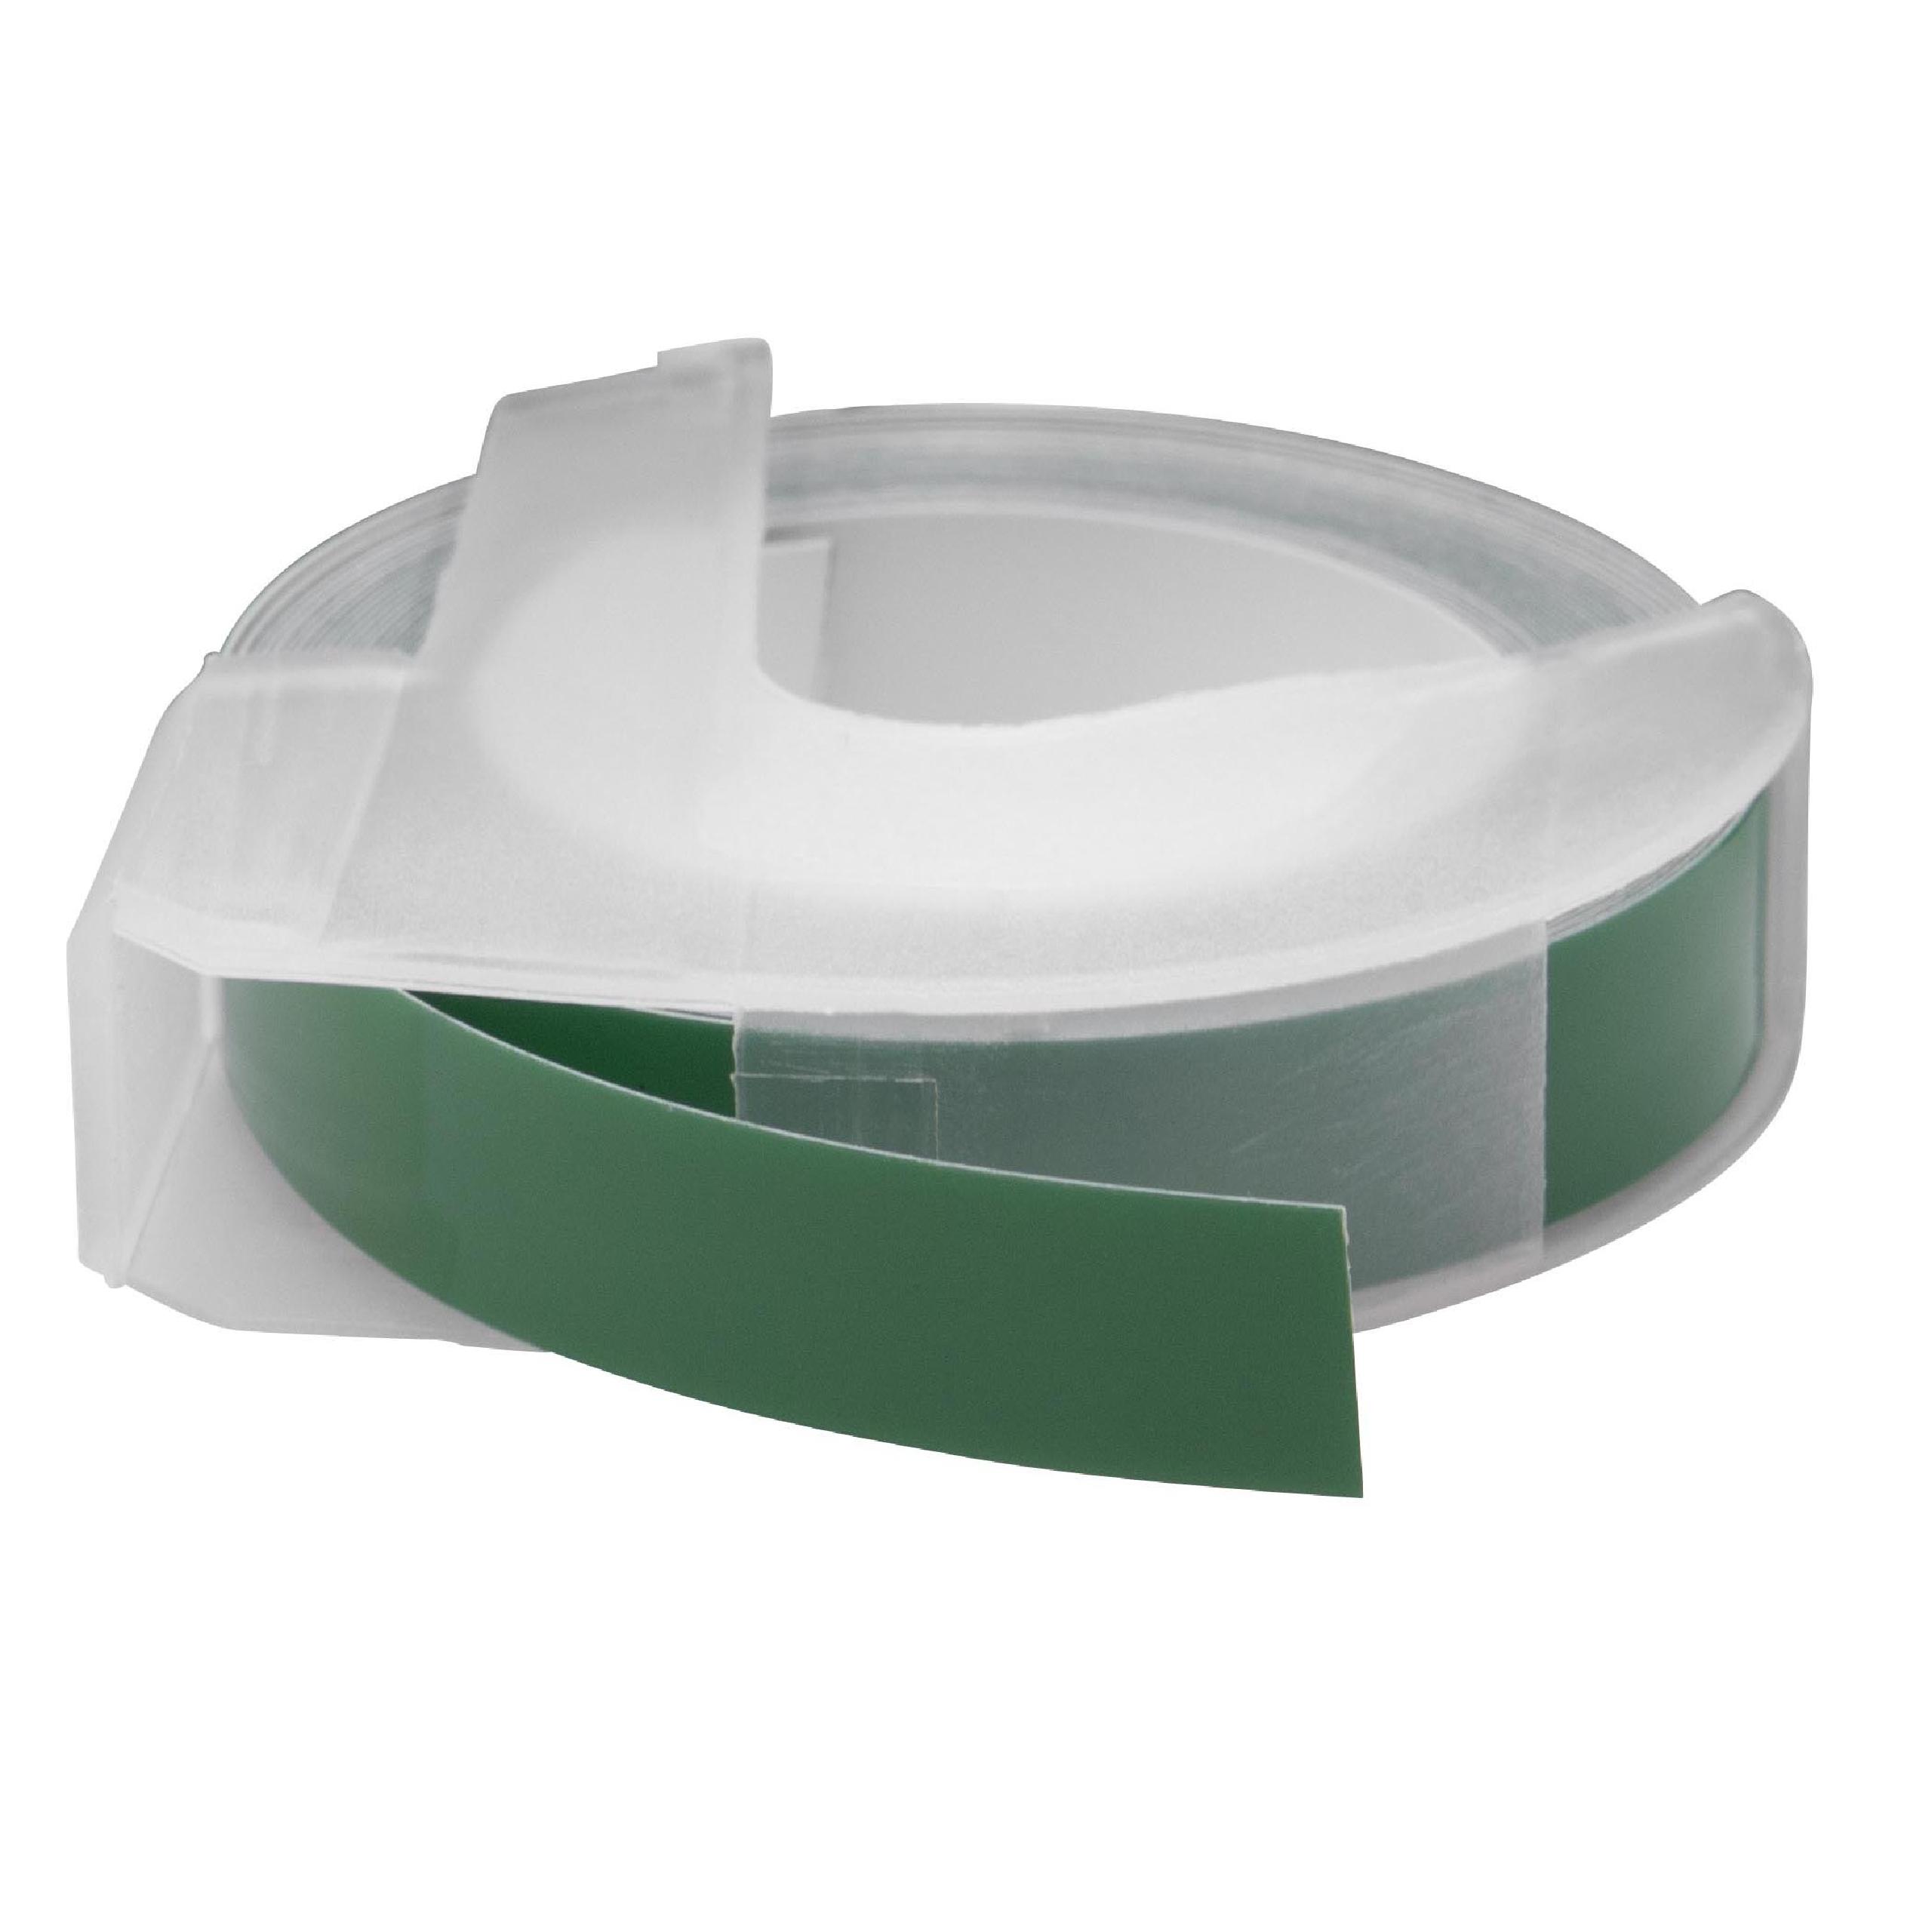 3D Embossing Label Tape as Replacement for Dymo 520105, S0898160 - 9 mm White to Green